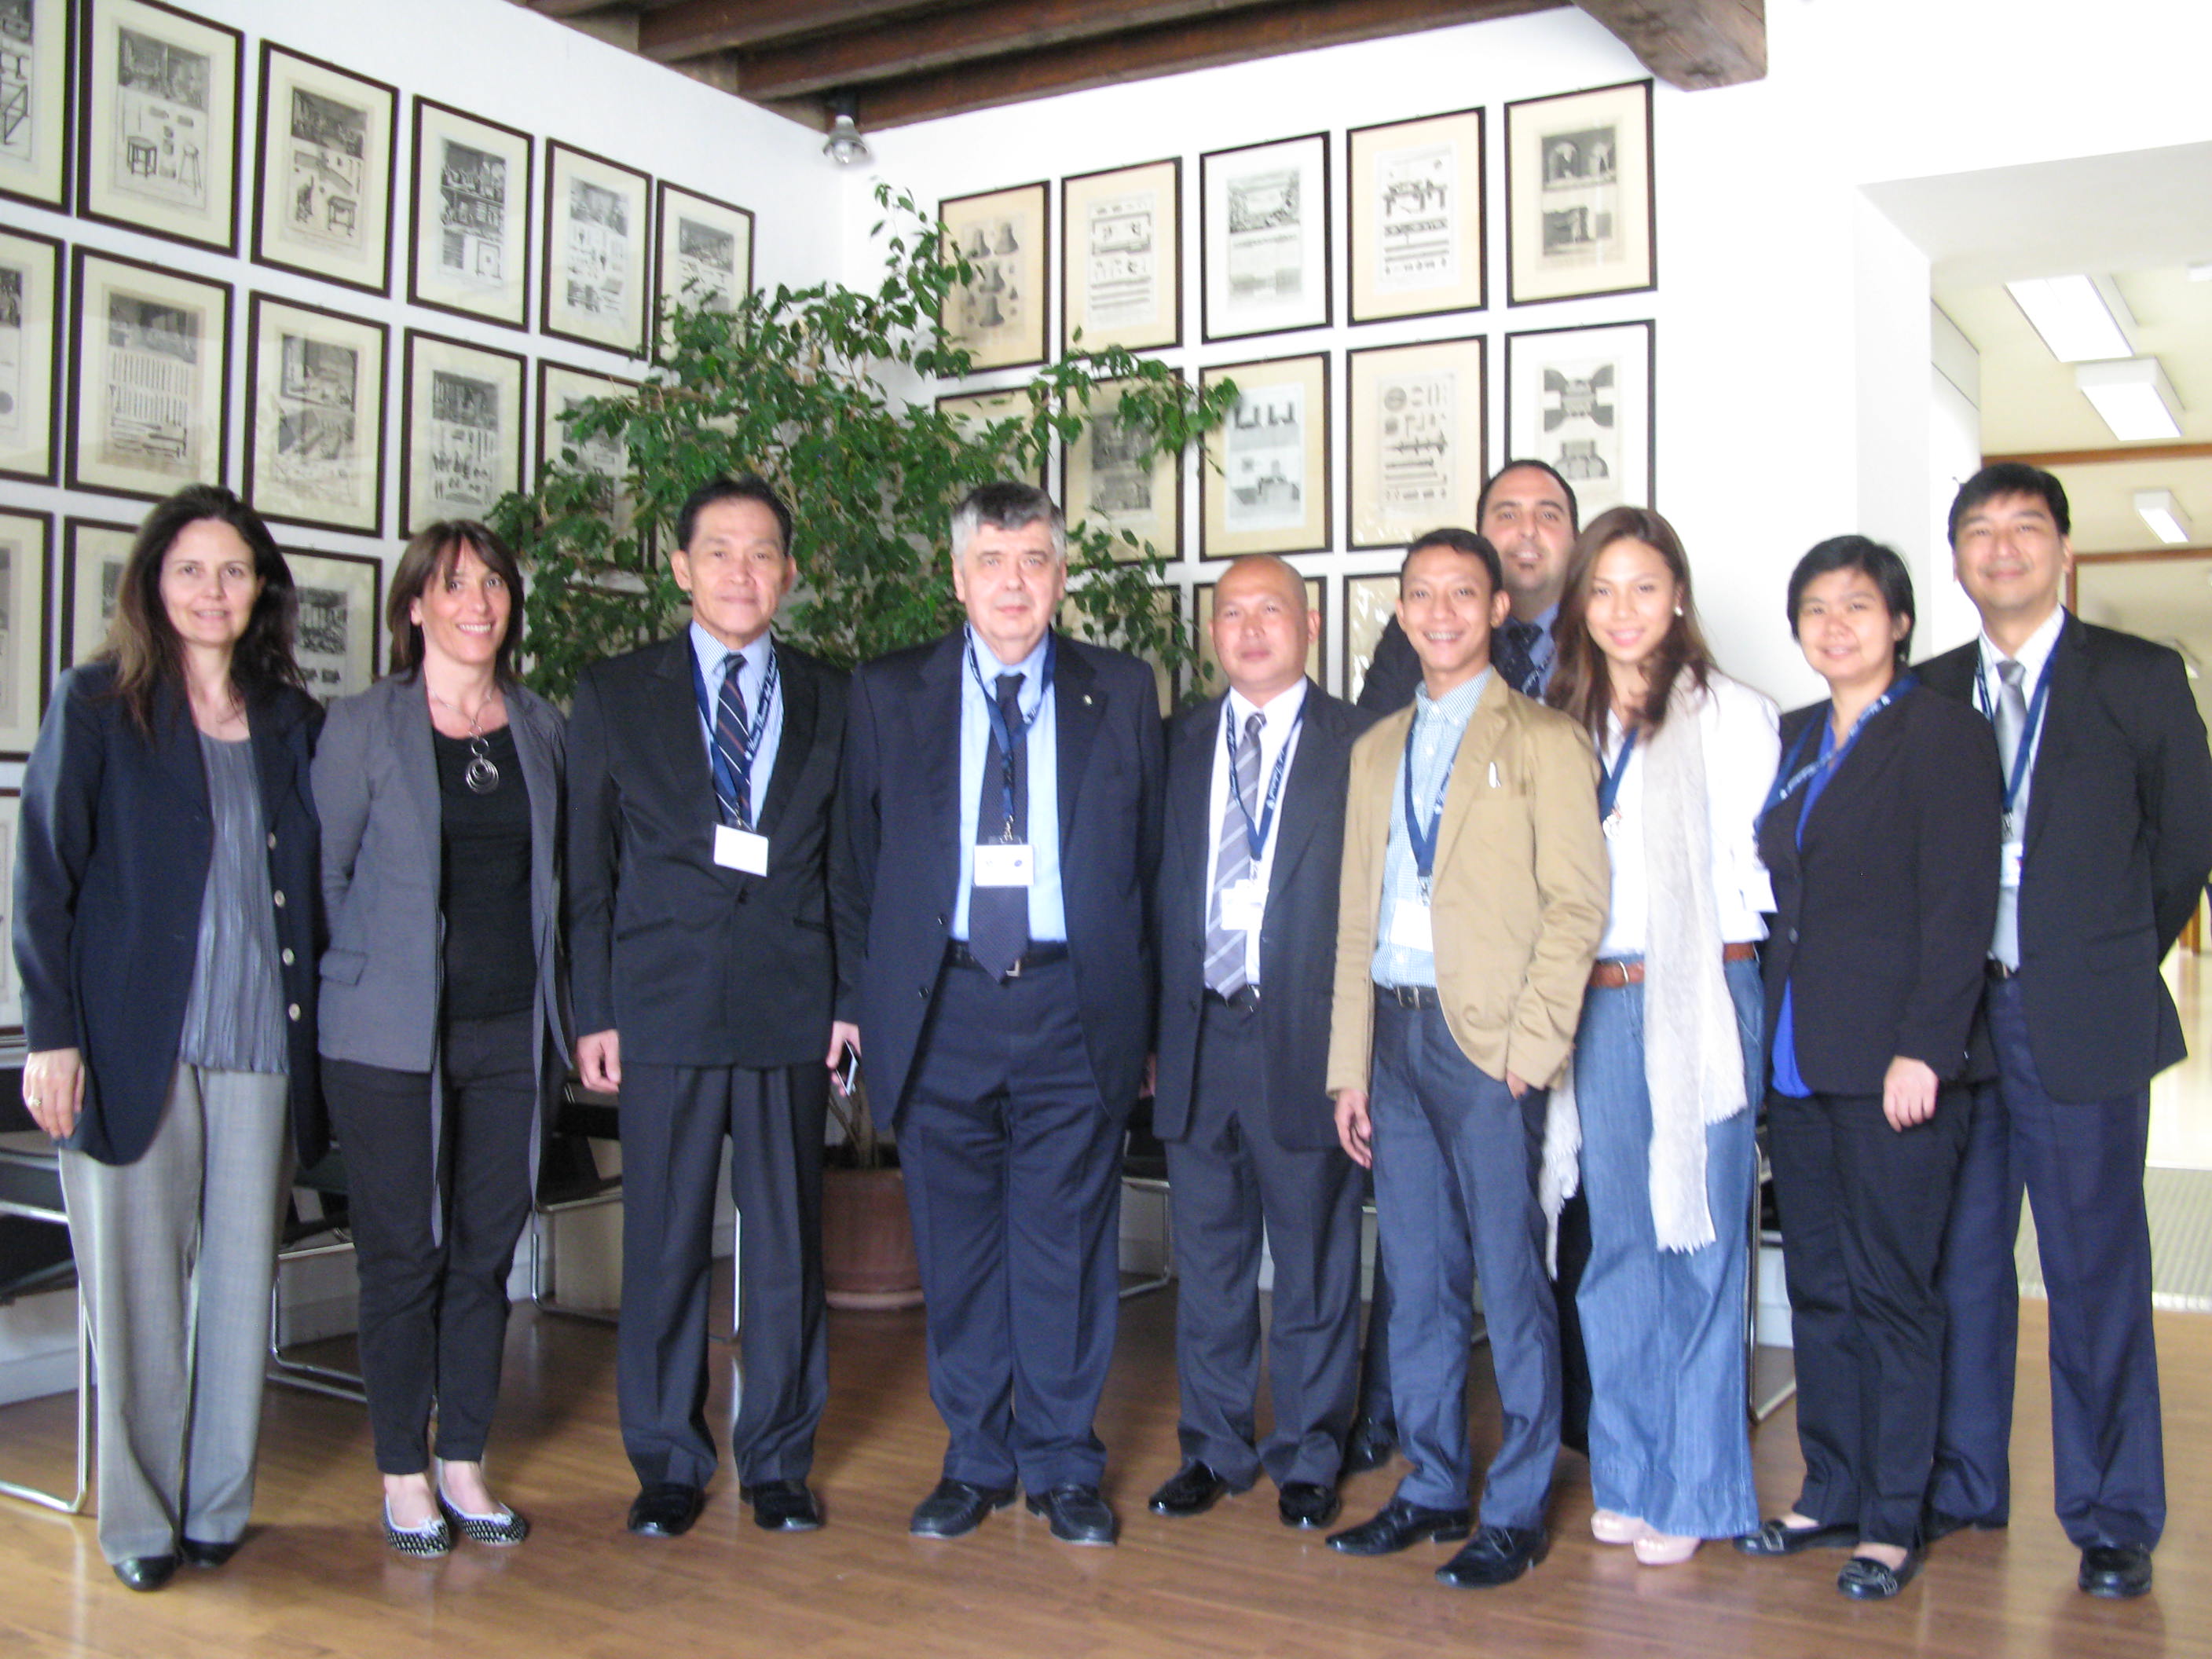 Official visit of the Philippines’ delegation in Parma